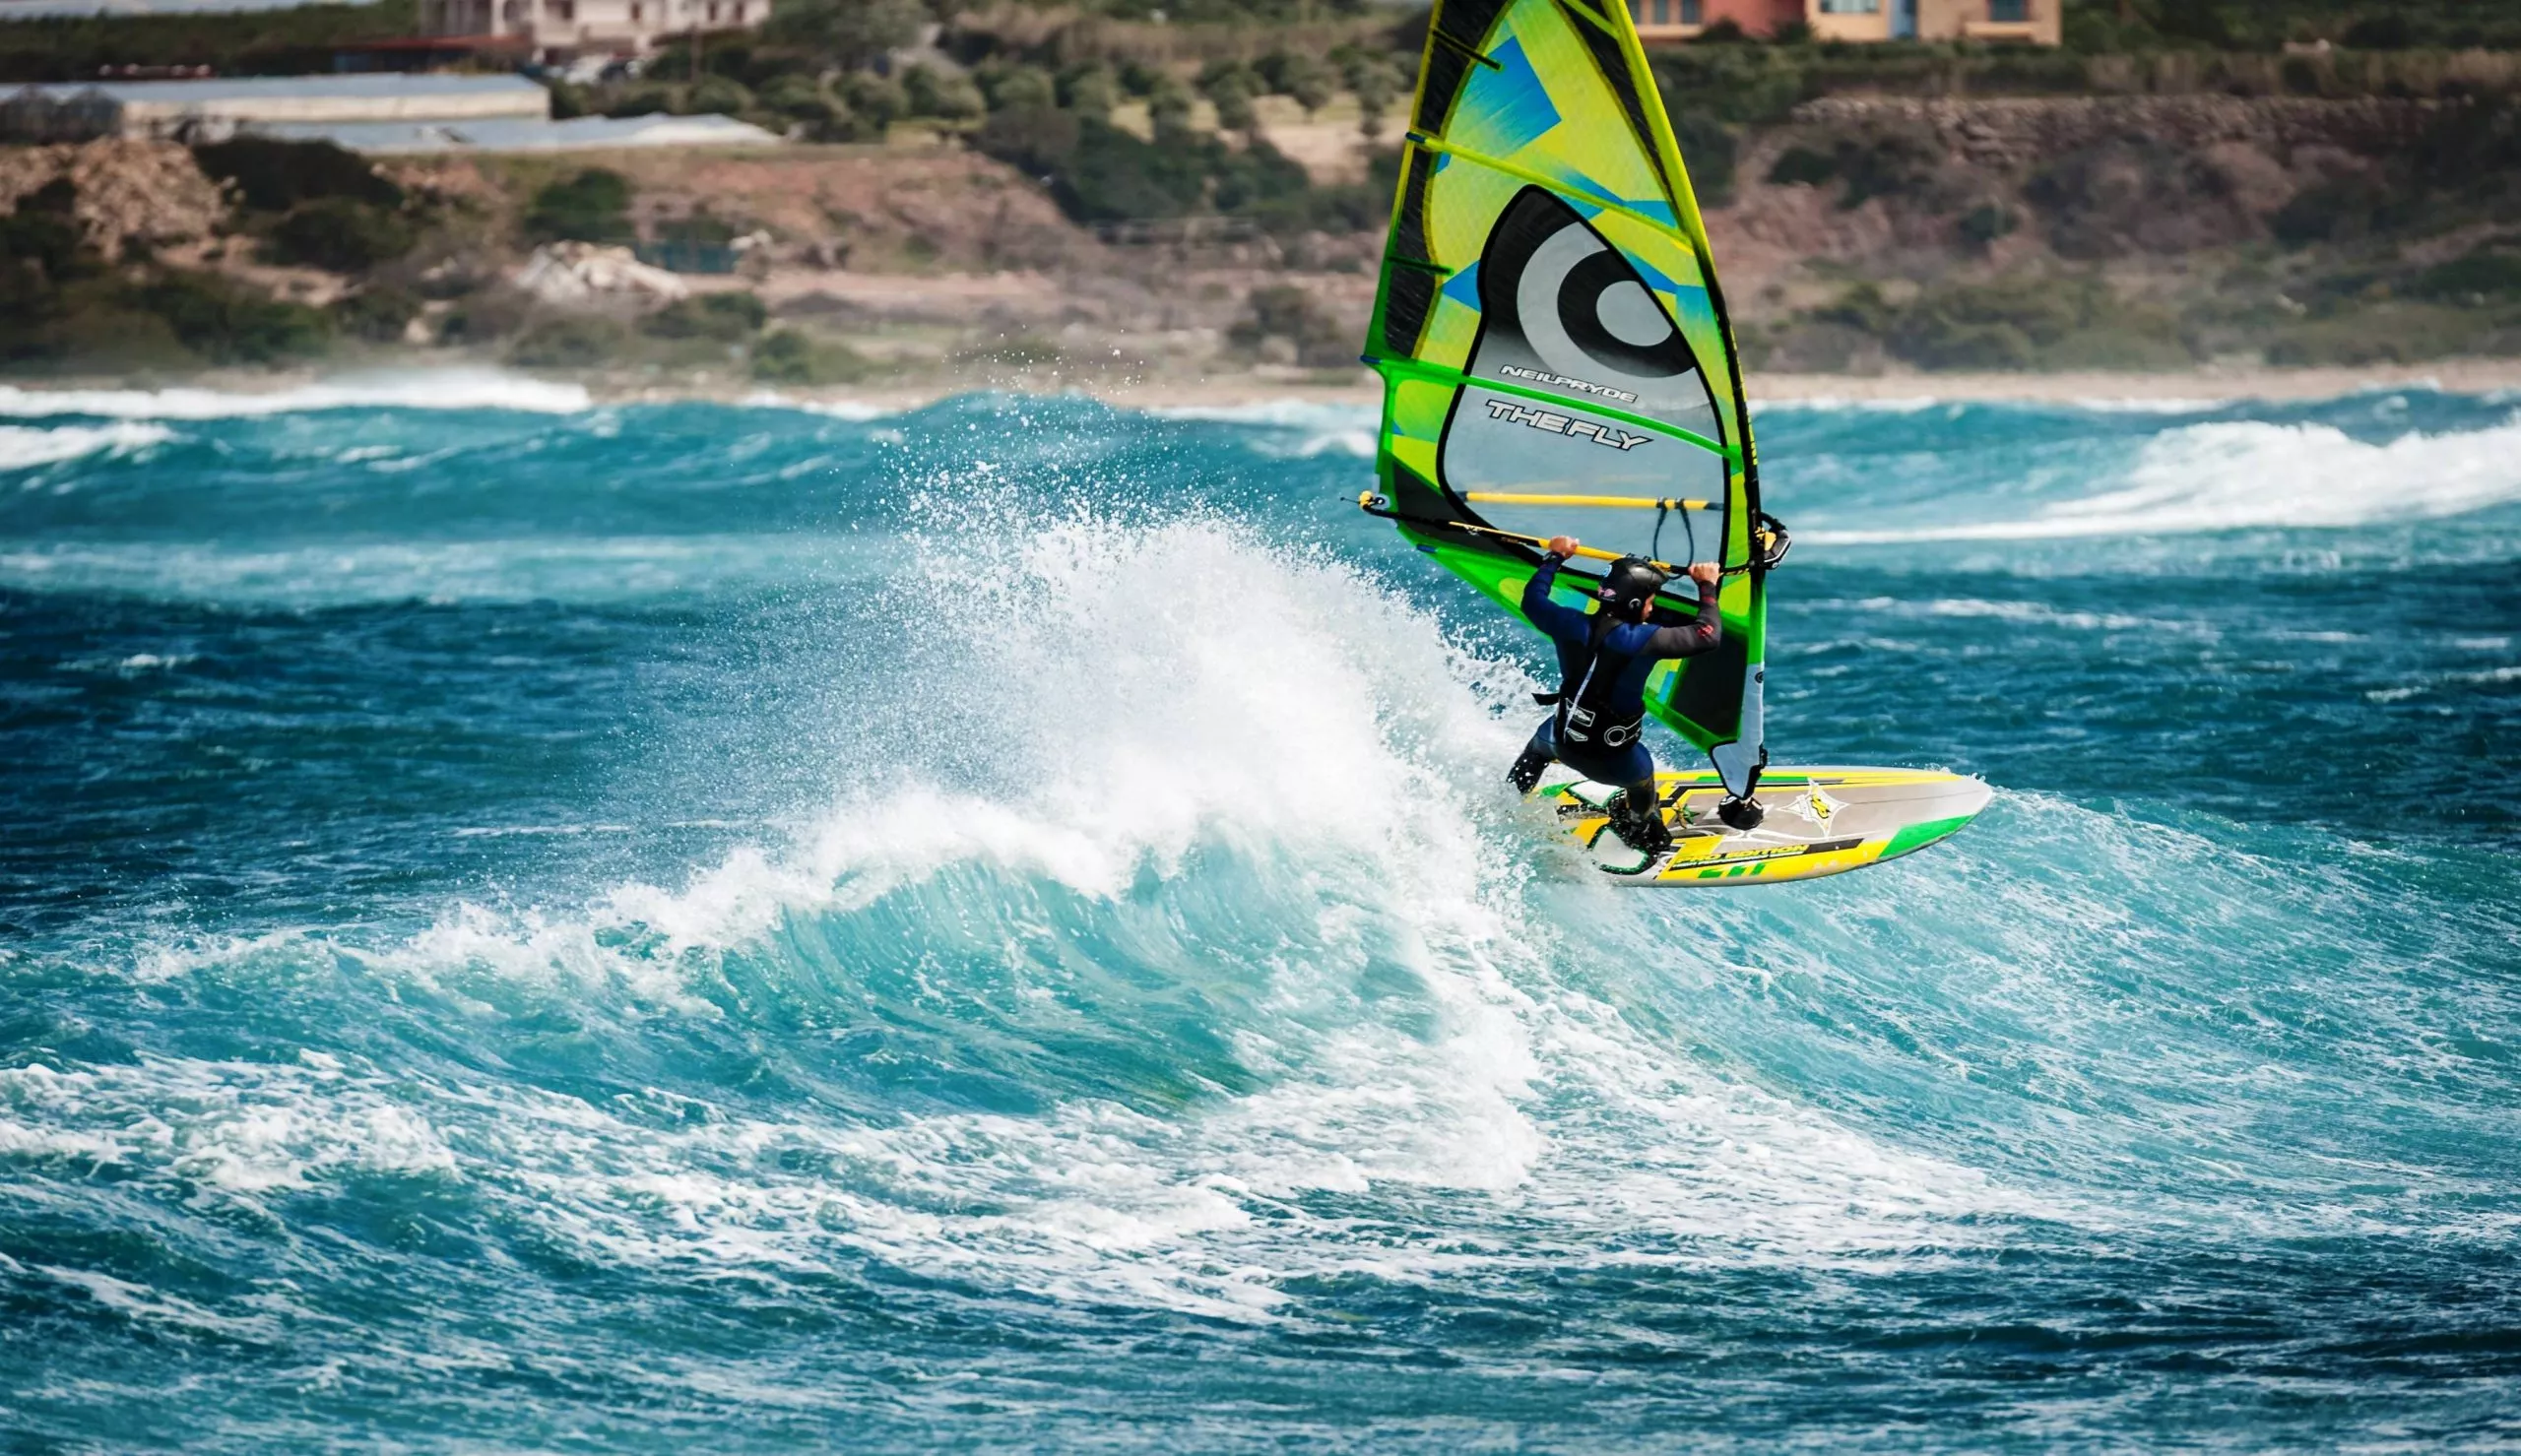 Maremoto Surf Center in Italy, Europe | Windsurfing - Rated 1.1